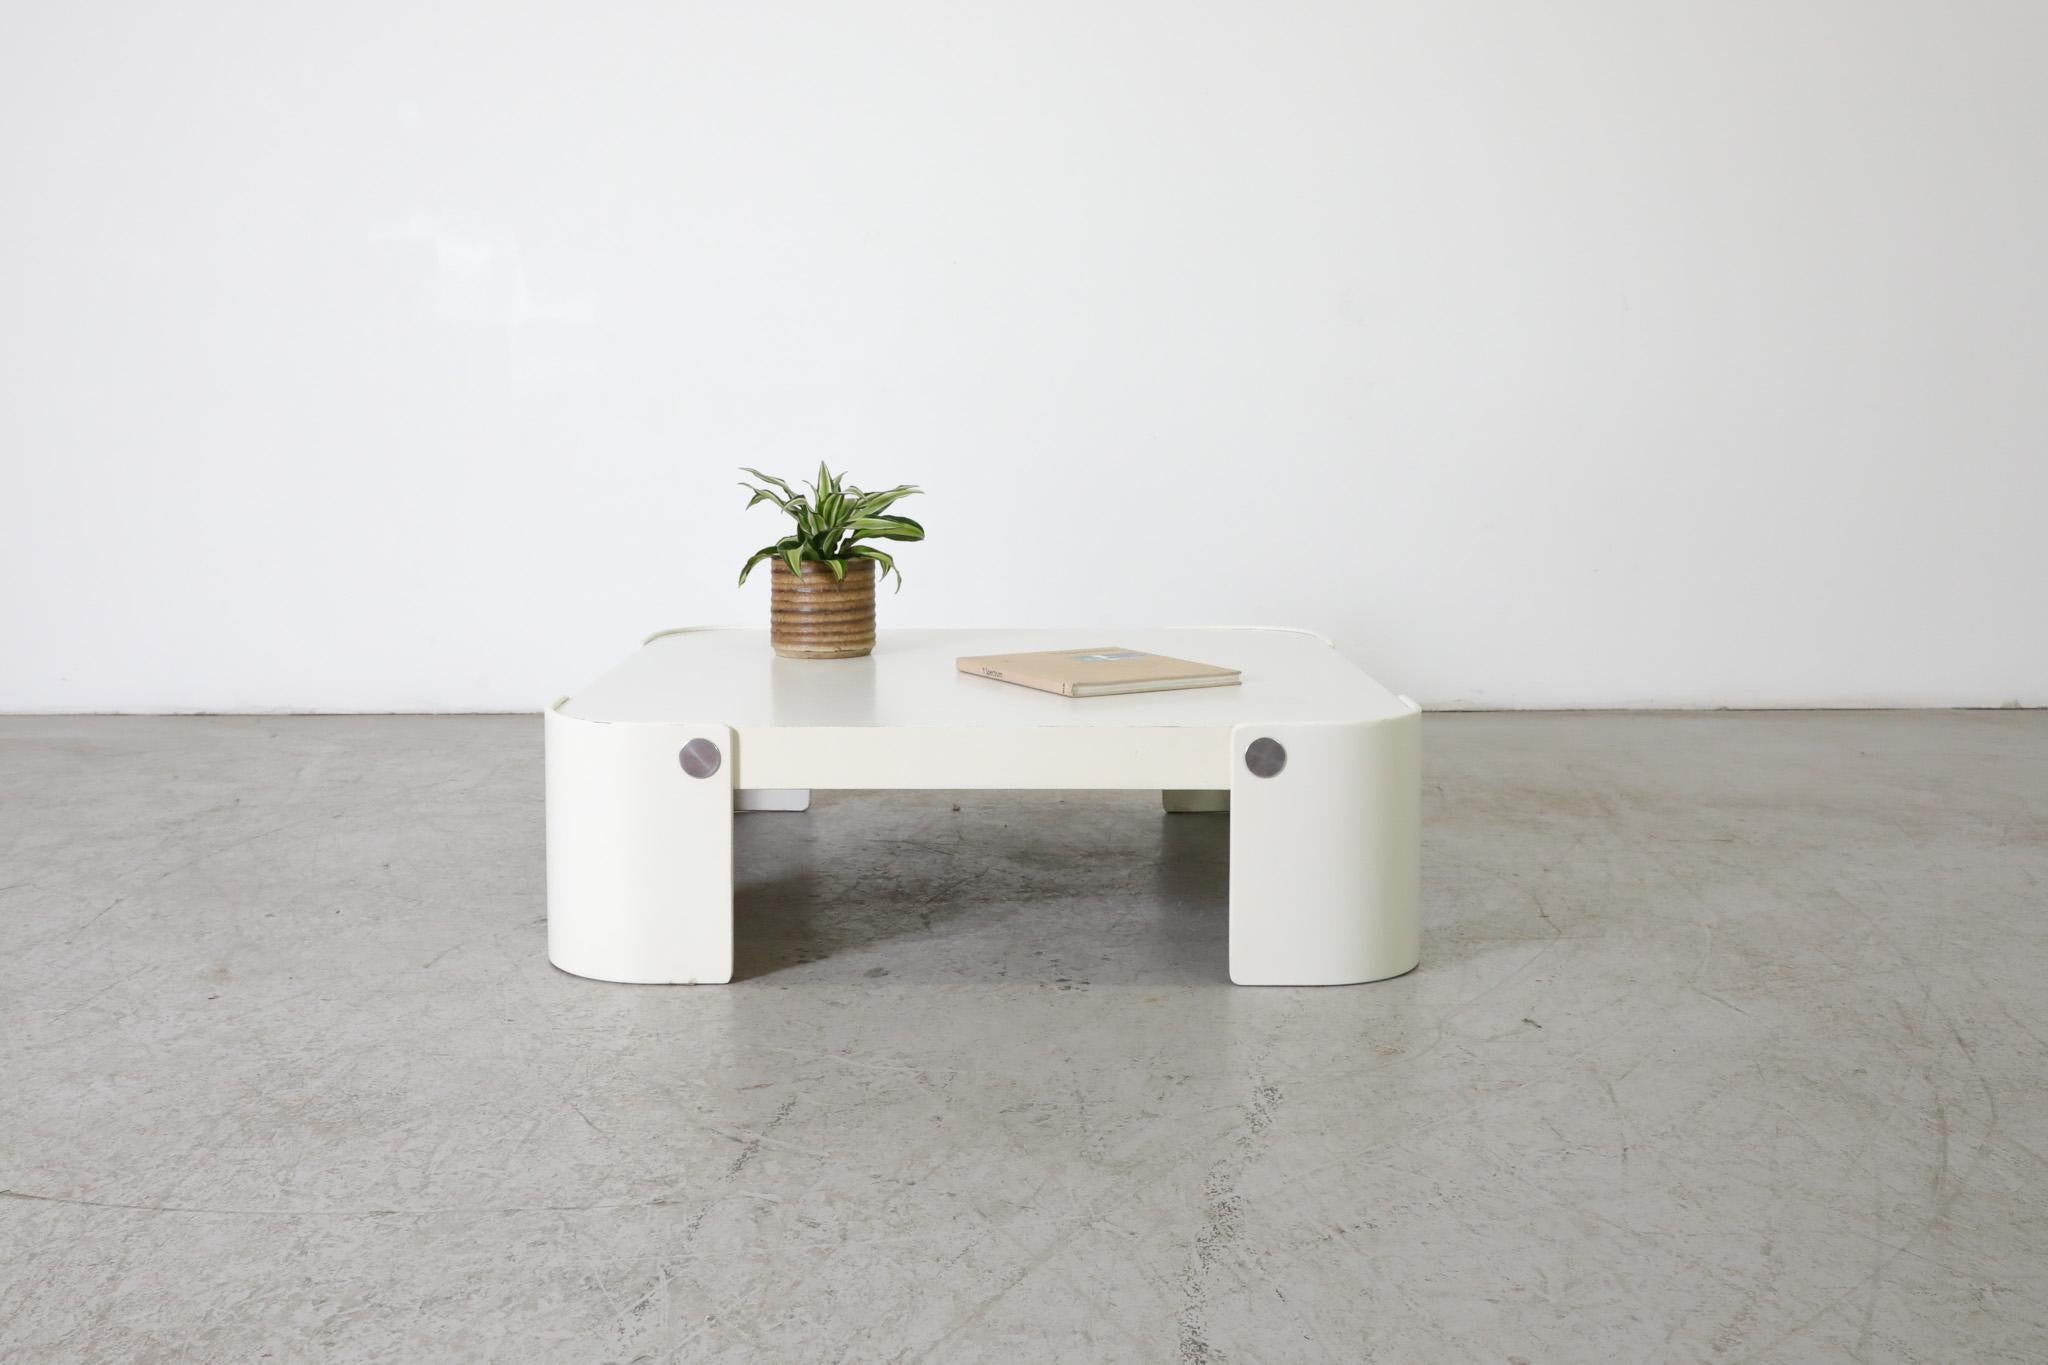 Mod 'Trinum' series coffee table by Peter Maly for COR, 1970s. Sleek laminate table with curved bentwood legs and chrome knob details. The well executed minimalist design compliments its all white appearance making for a seamless mesh of